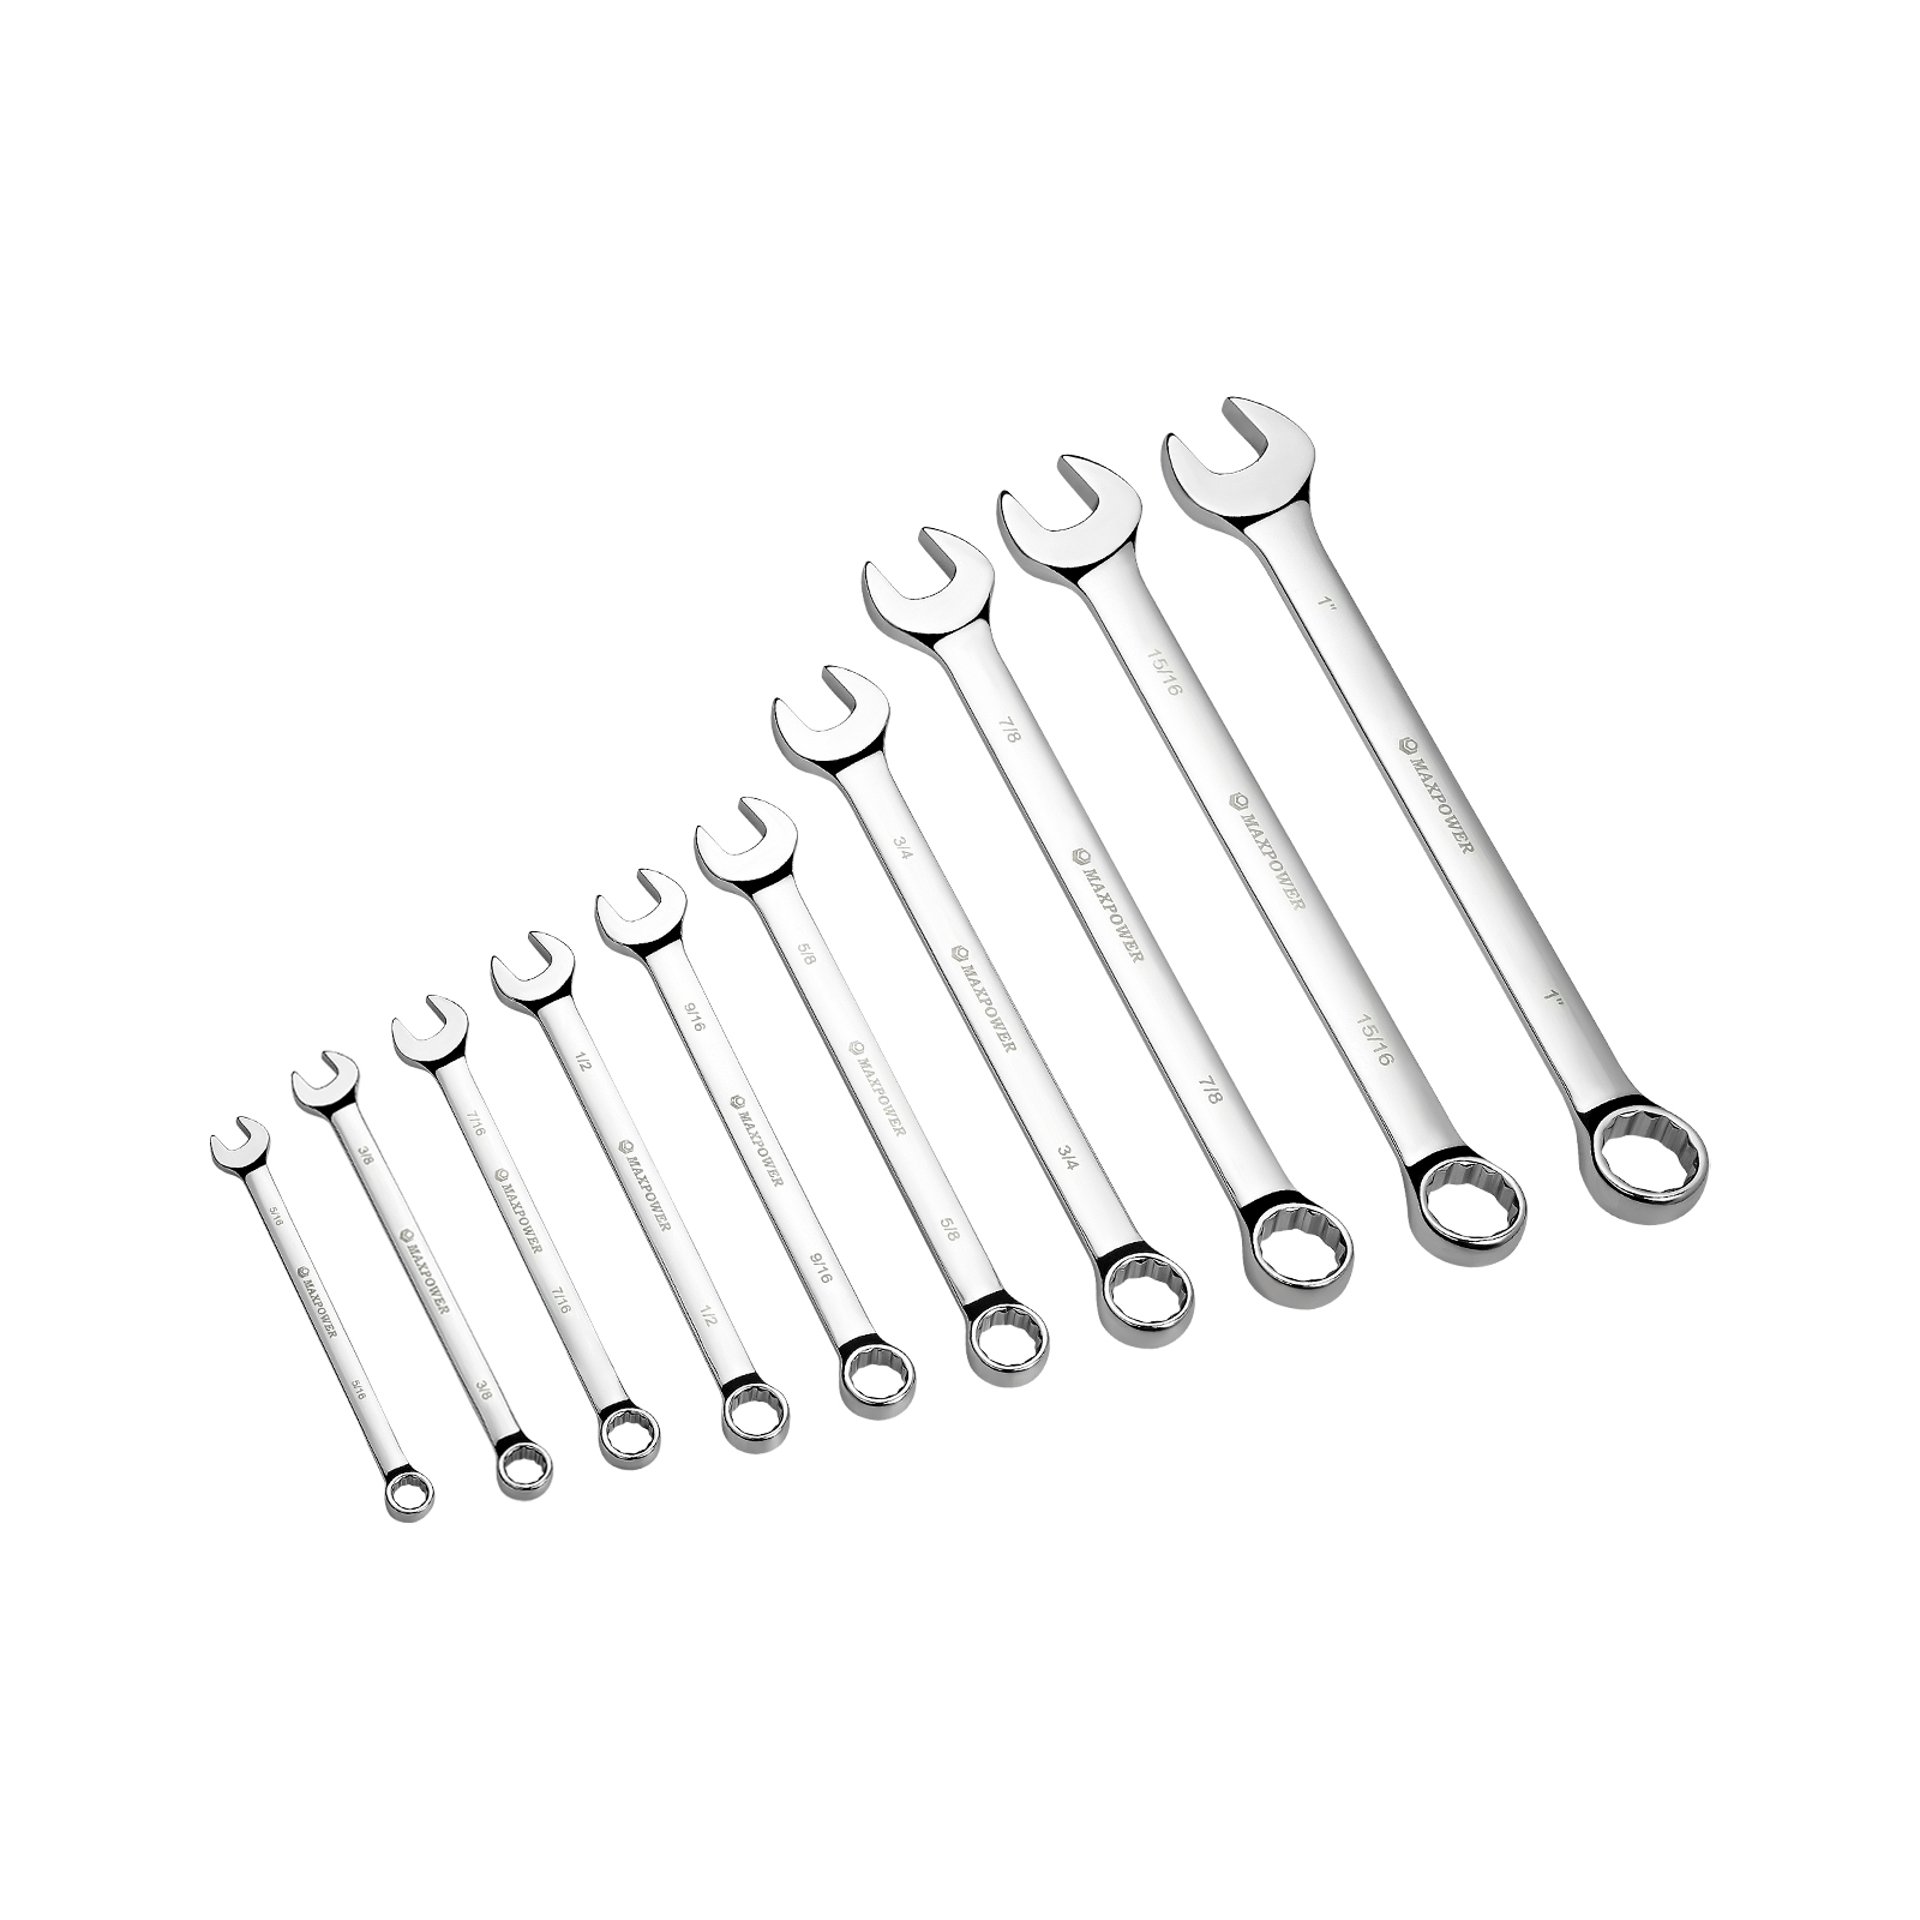 MAXPOWER 10-piece SAE Combination Wrench Set